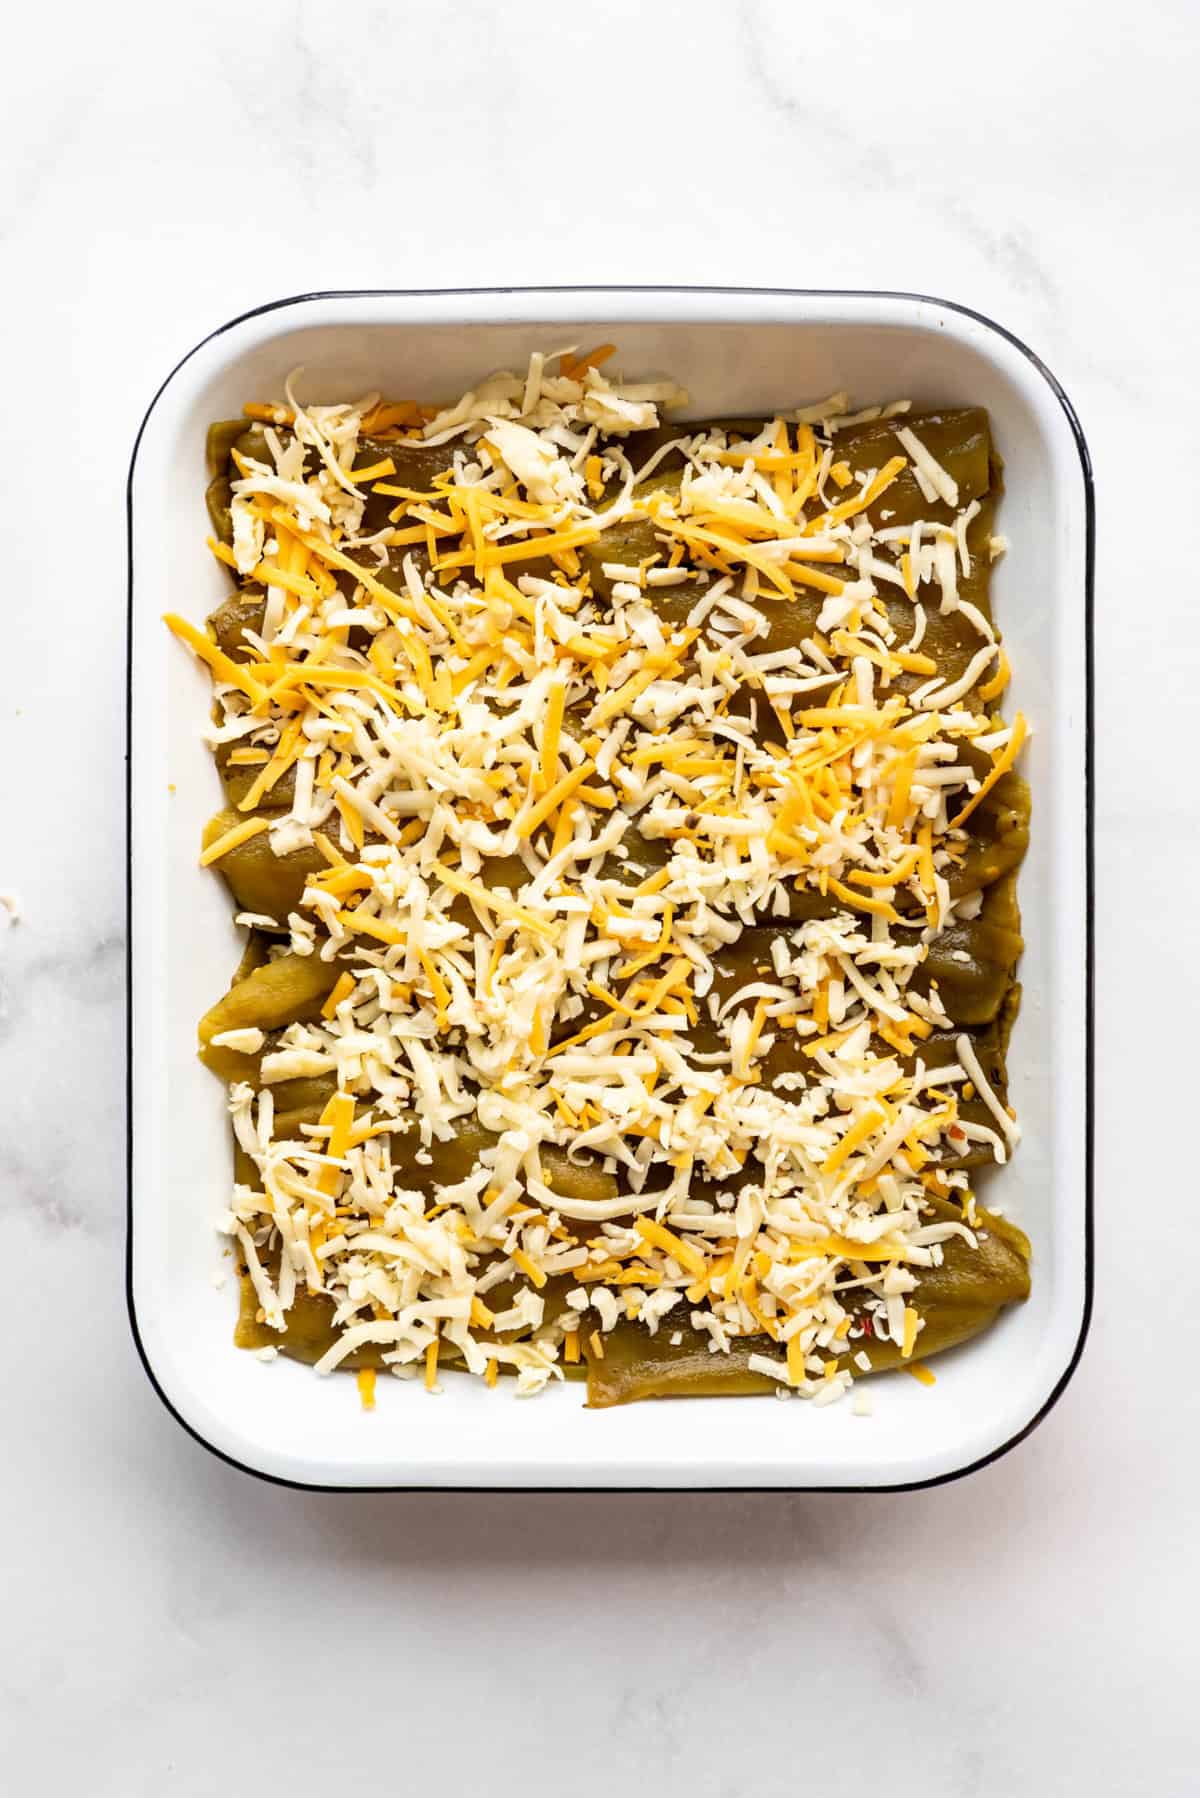 Repeating a layer of cheese to make a chile rellenos casserole.